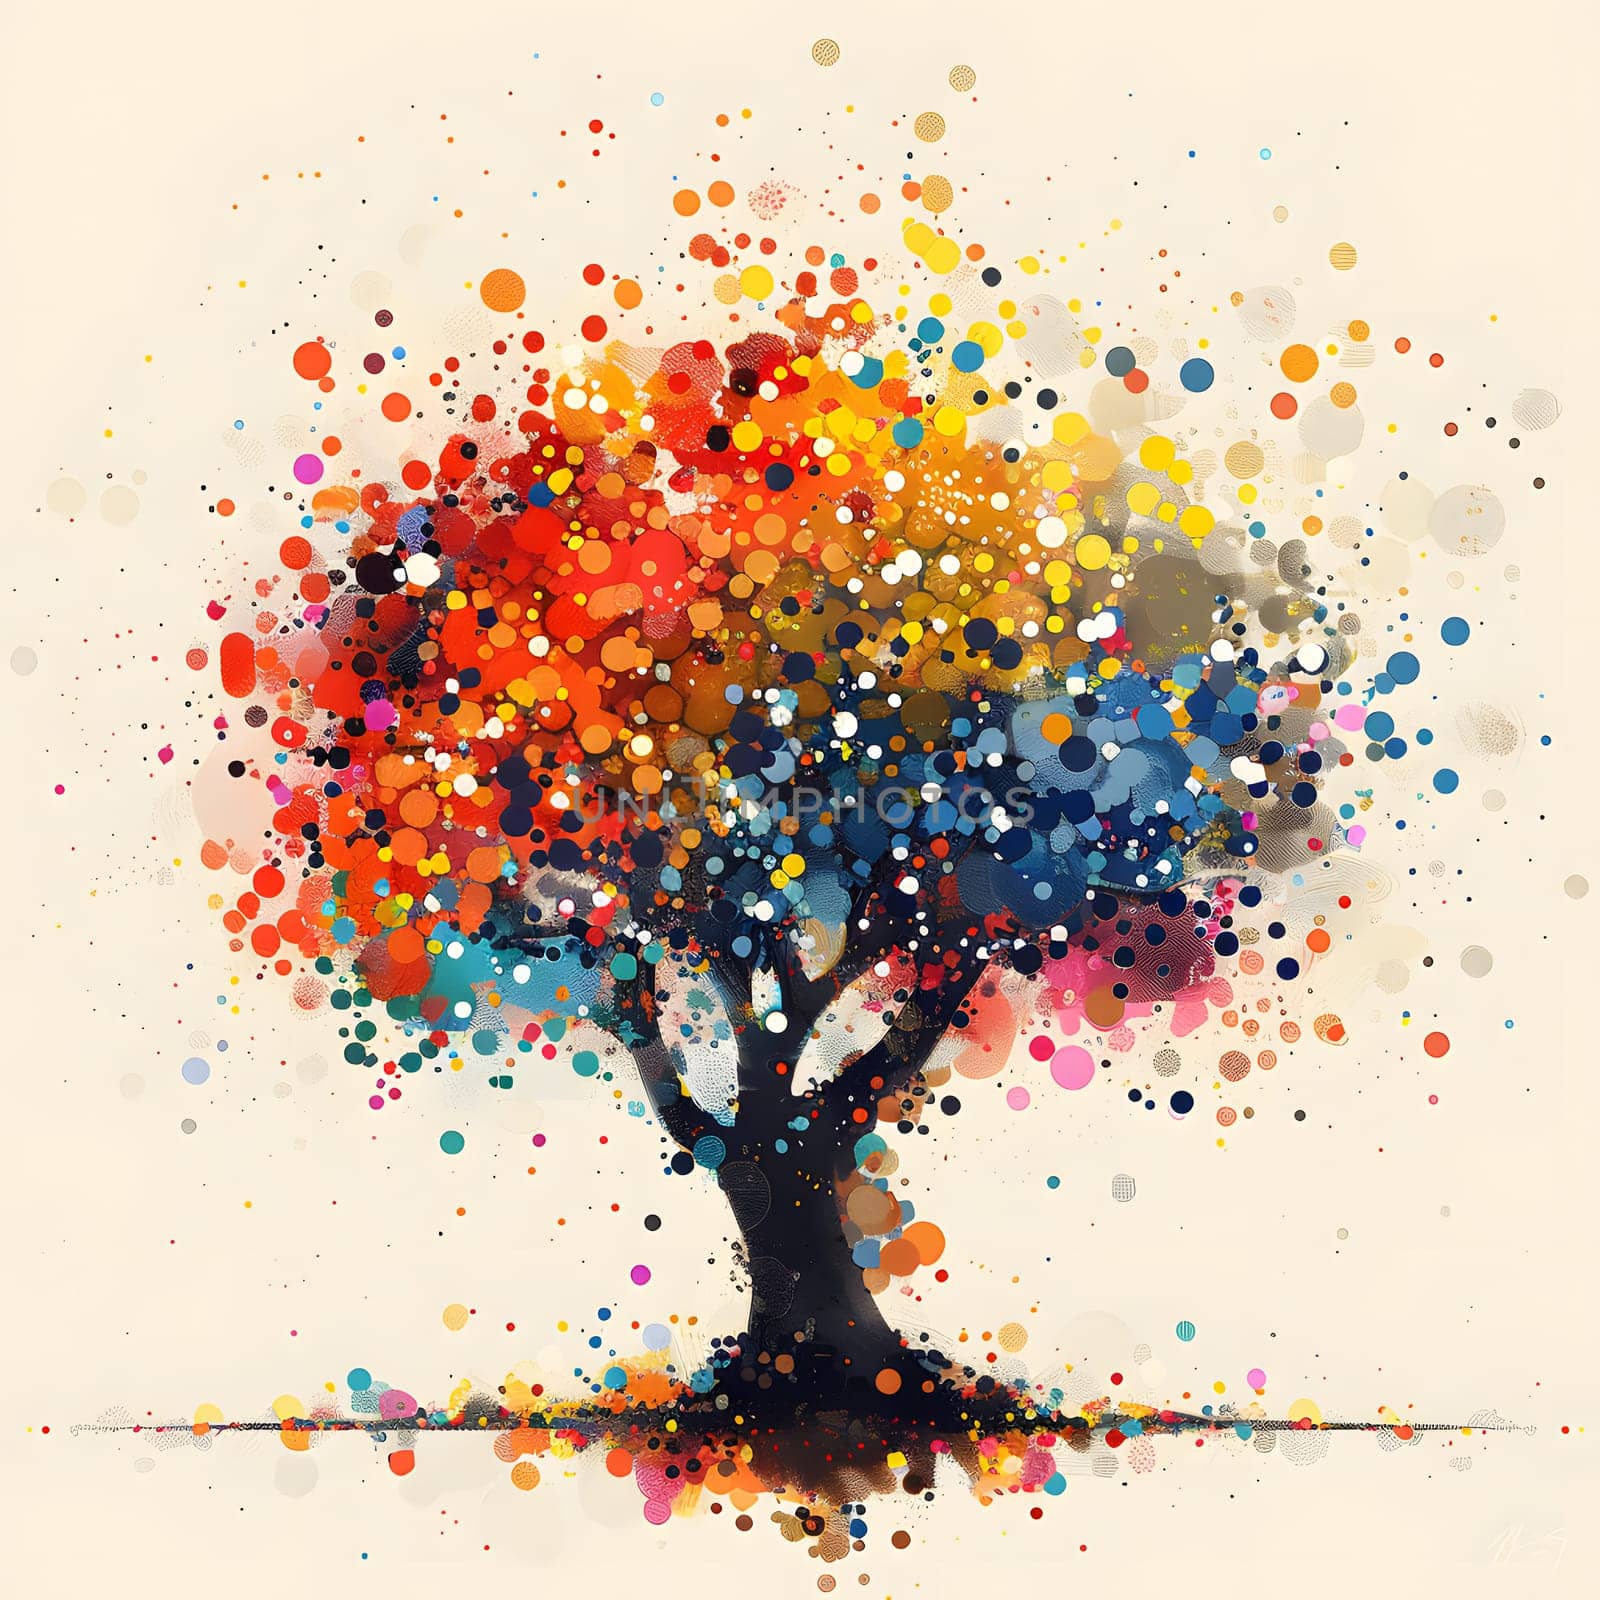 Art paint of a colorful tree on white background, depicting natures beauty by Nadtochiy